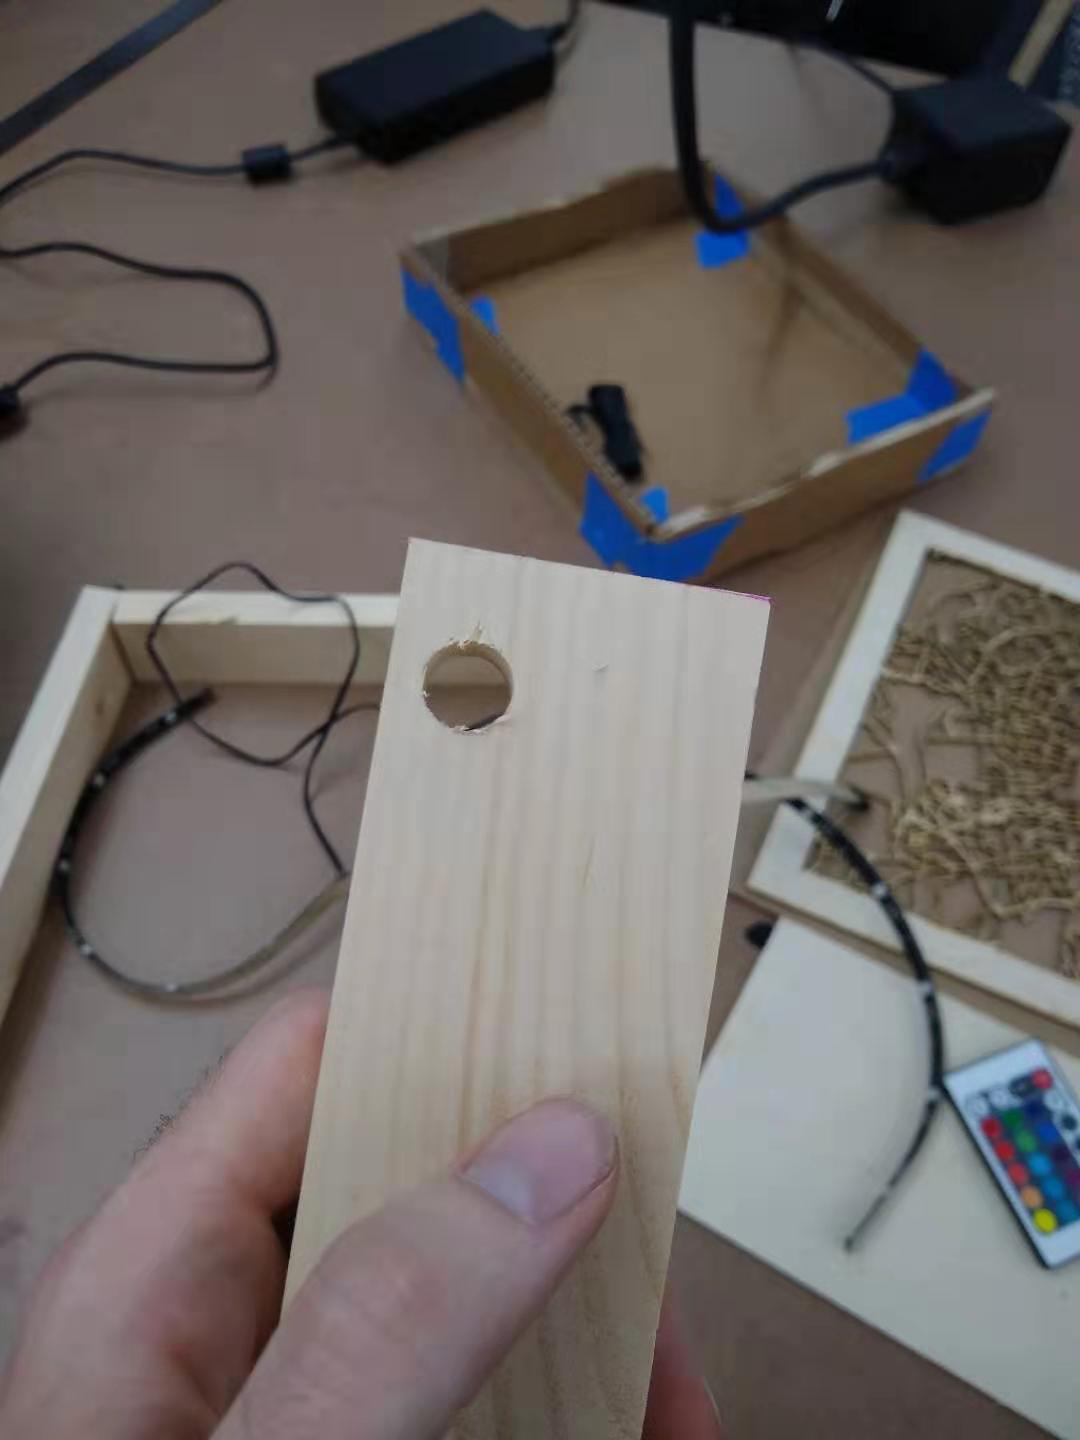 A piece of wood with a half-inch hole drilled through.